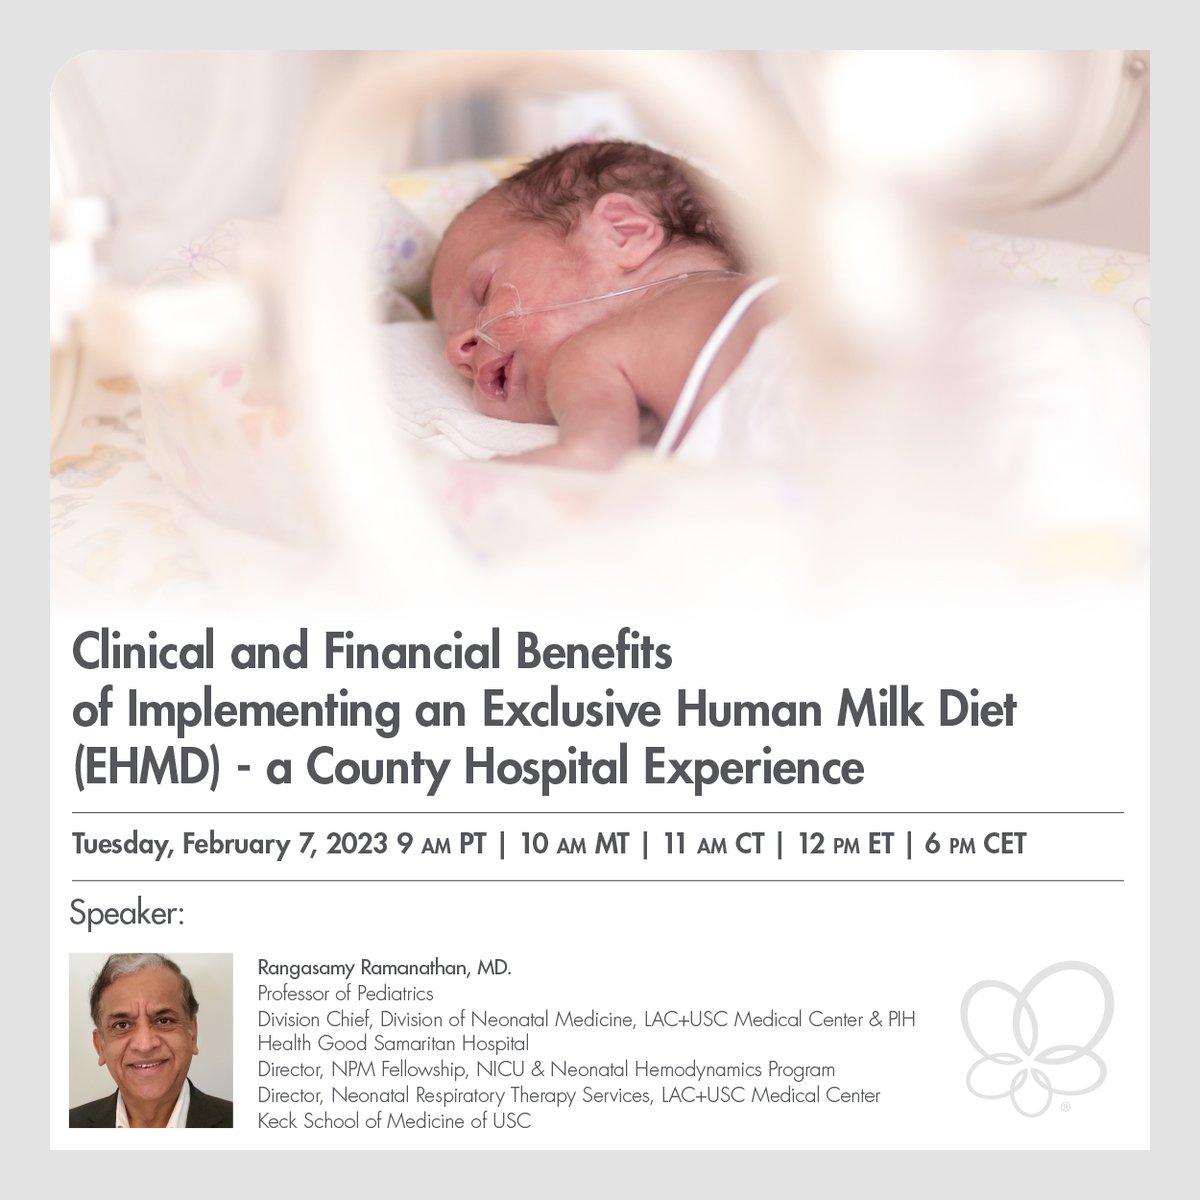 Join us Tuesday, February 7 at 9 a.m. PT with Rangasamy Ramanathan, MD, Los Angeles County+USC Medical Center. He will discuss the Clinical and Financial Benefits of Implementing an #EHMD.
hubs.li/Q01yw0rj0
#neonatalcare #nicu #neonatology #infanthealth #pediatrics #EHMD